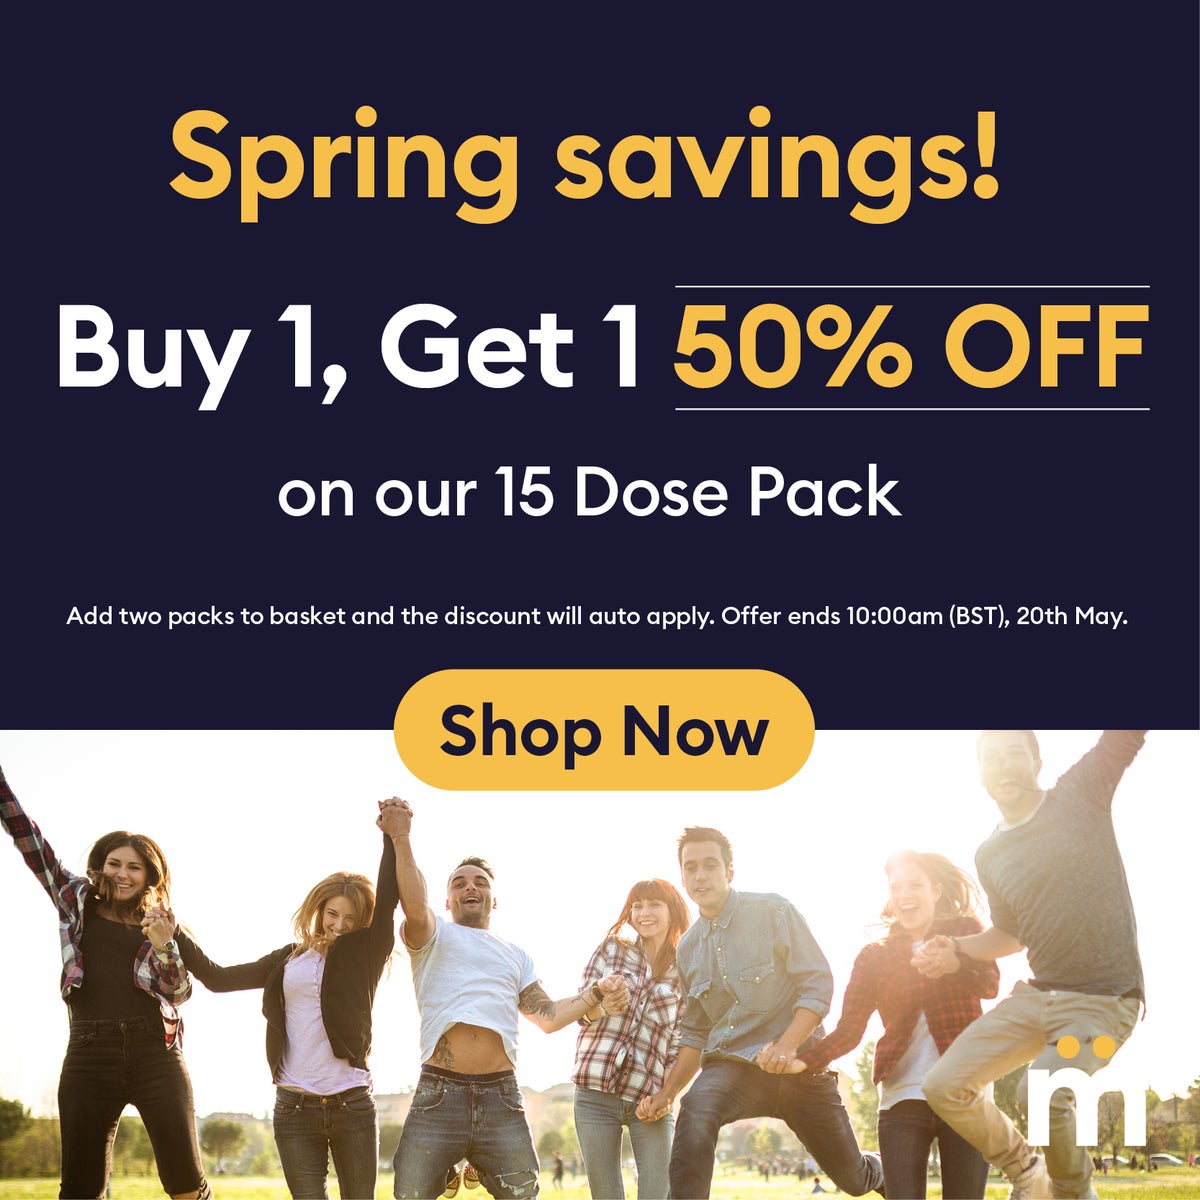 Spring savings! Buy 1, get 1 50% off on our 15 dose pack. Add two packs to basket and the discount will auto apply. Offer ends 10:00am (BST), 20th May